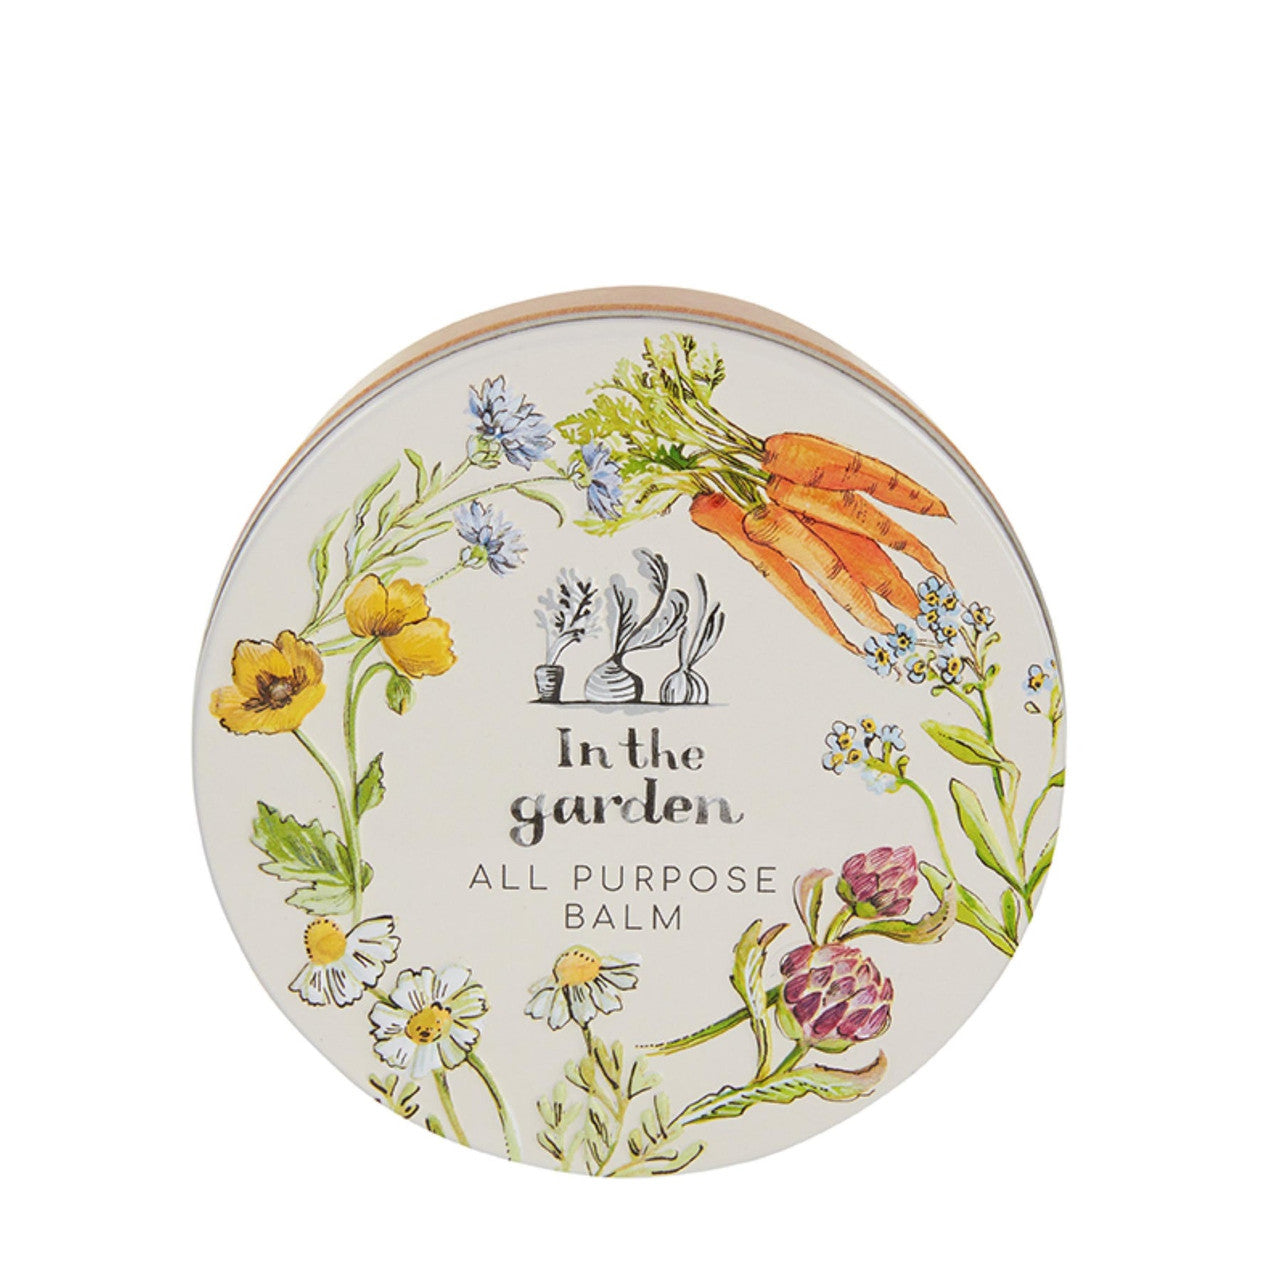 In The Garden All Purpose Balm by Heathcote and Ivory.